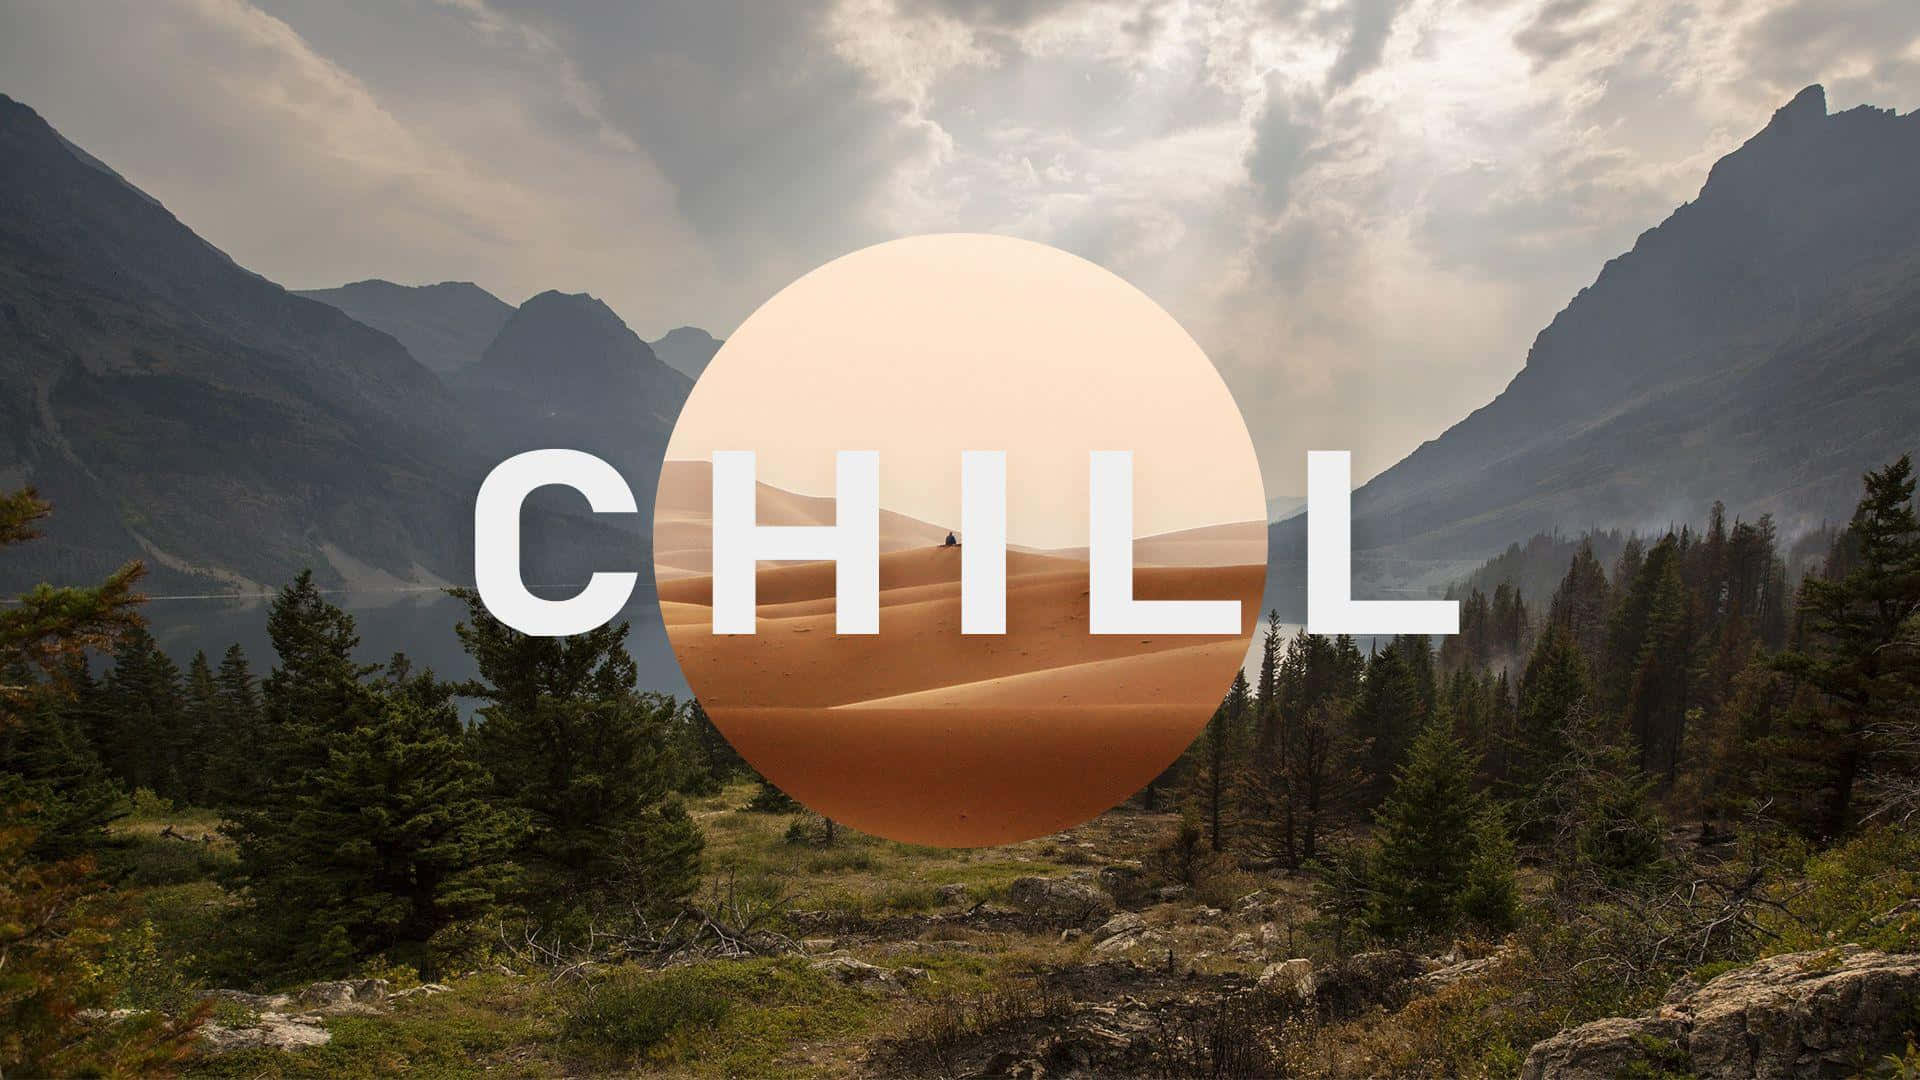 "Sit back, relax and enjoy the perfect moment for a 'chill'"